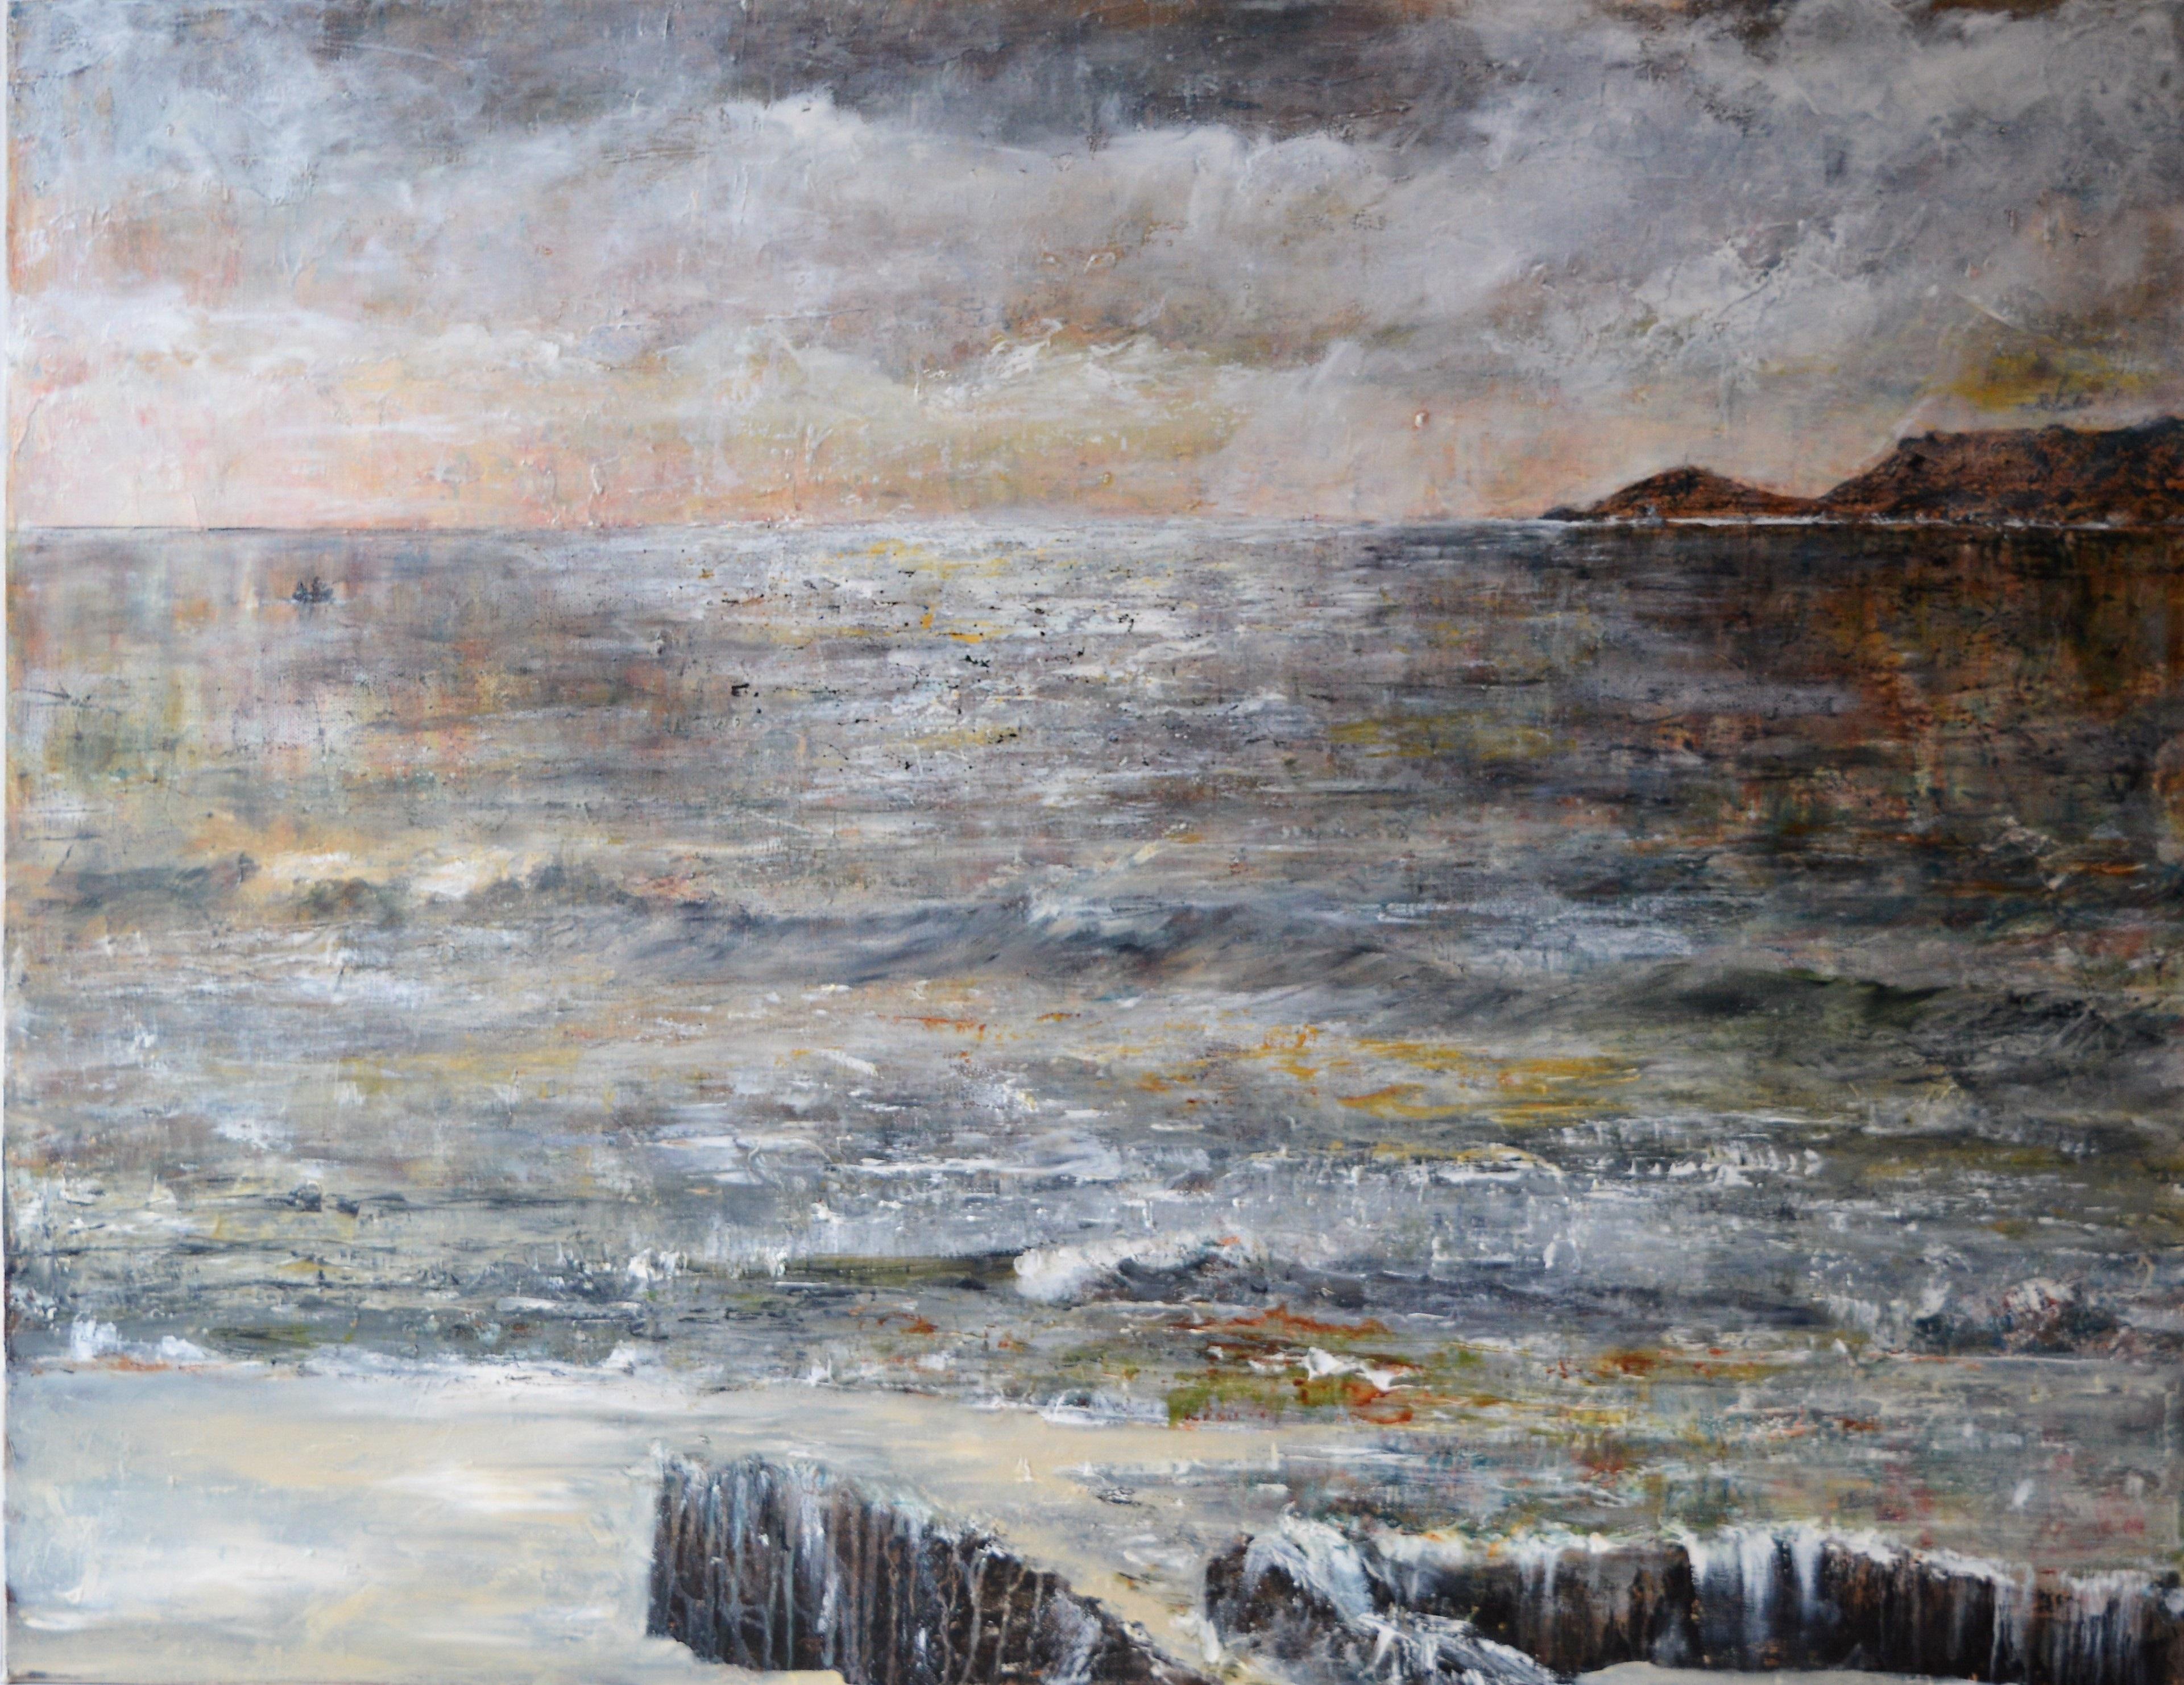 Penny Rumble Landscape Painting - The Remains Of The Day. Contemporary Oil Seascape Painting